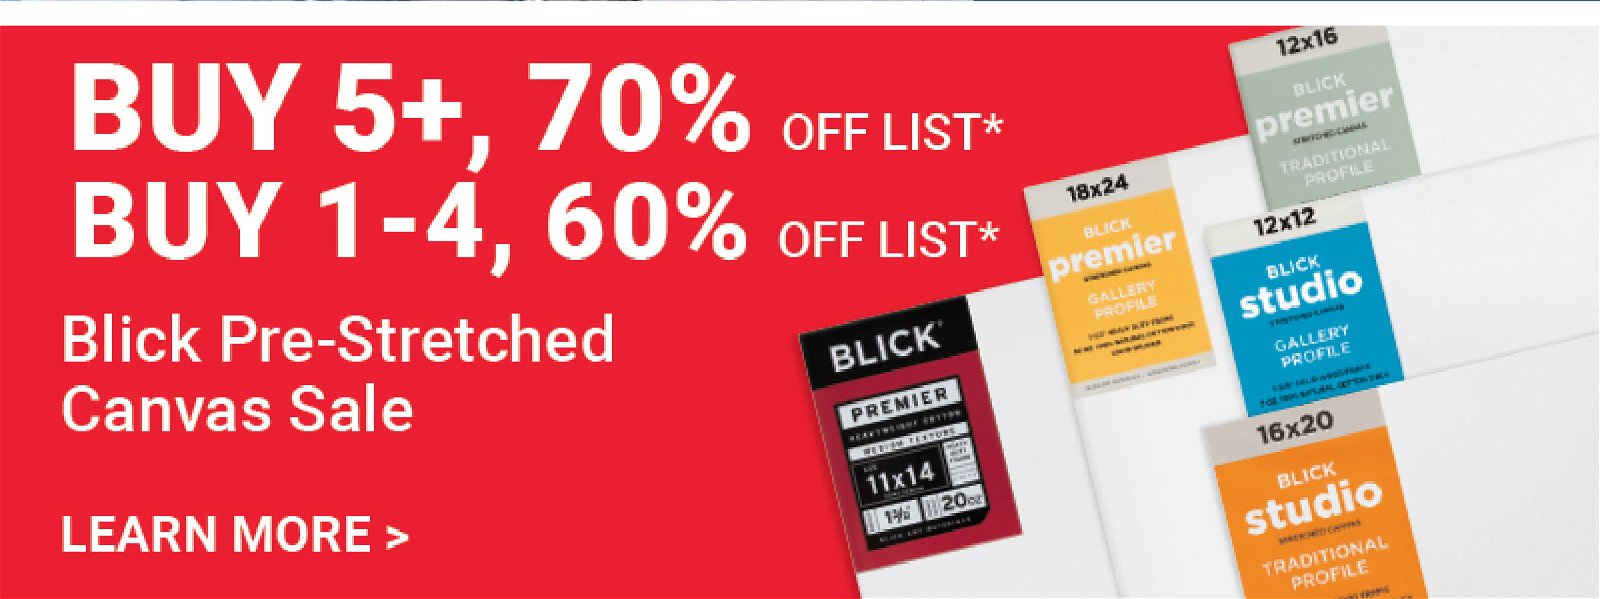 Buy 5+, 70% Off List Buy 1-4, 60% Off List: Blick Pre-Stretched Canvas Sale